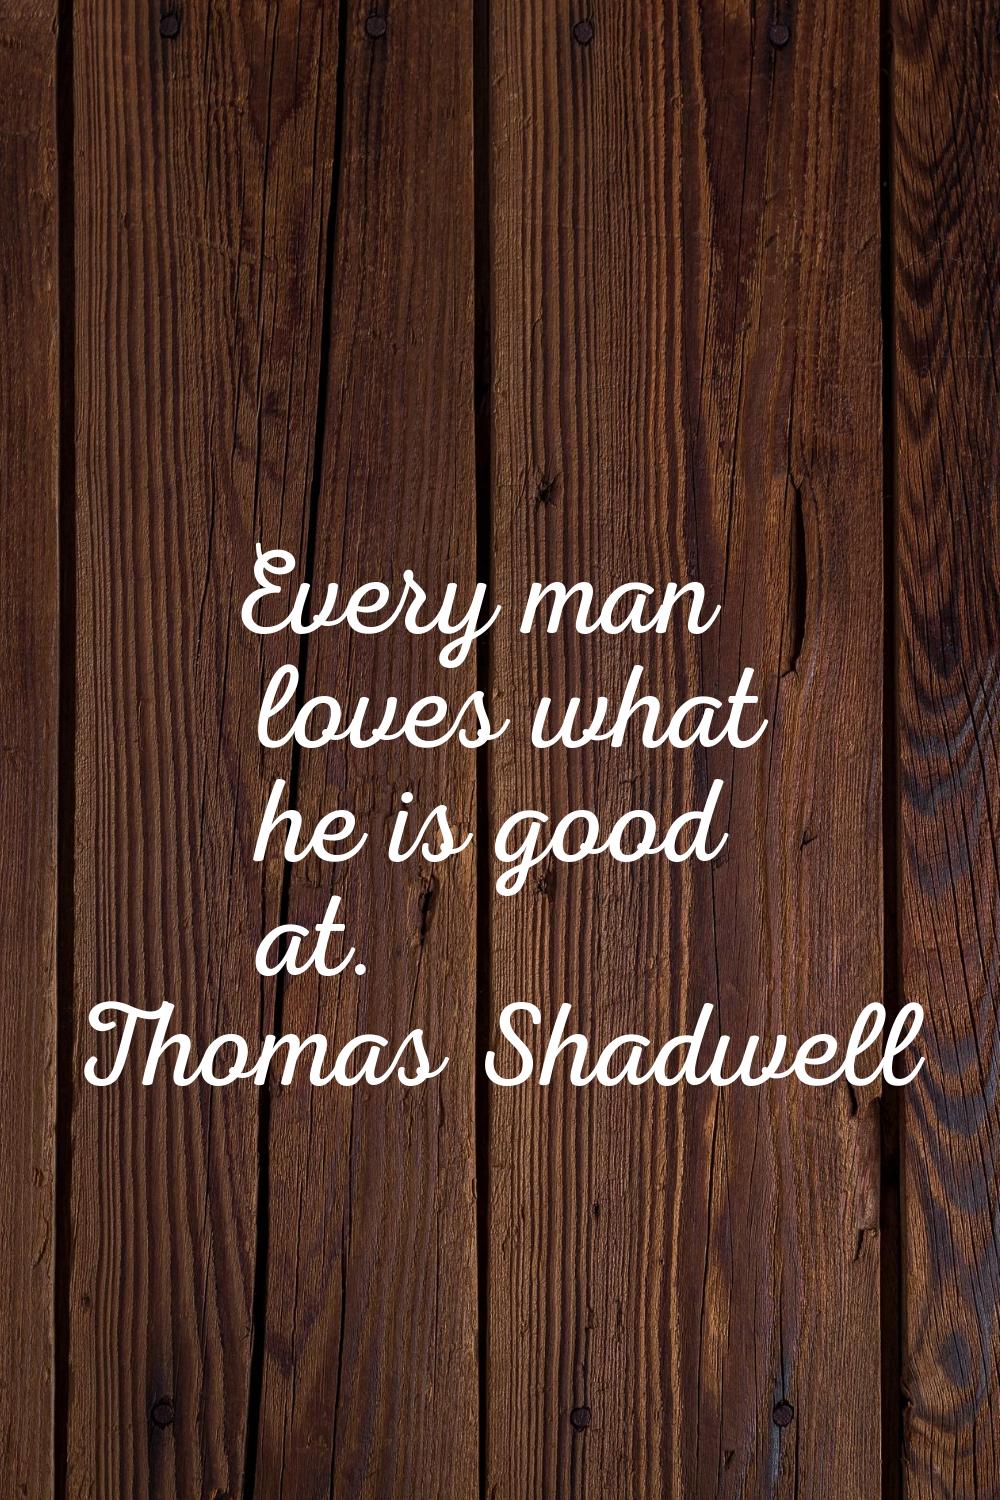 Every man loves what he is good at.